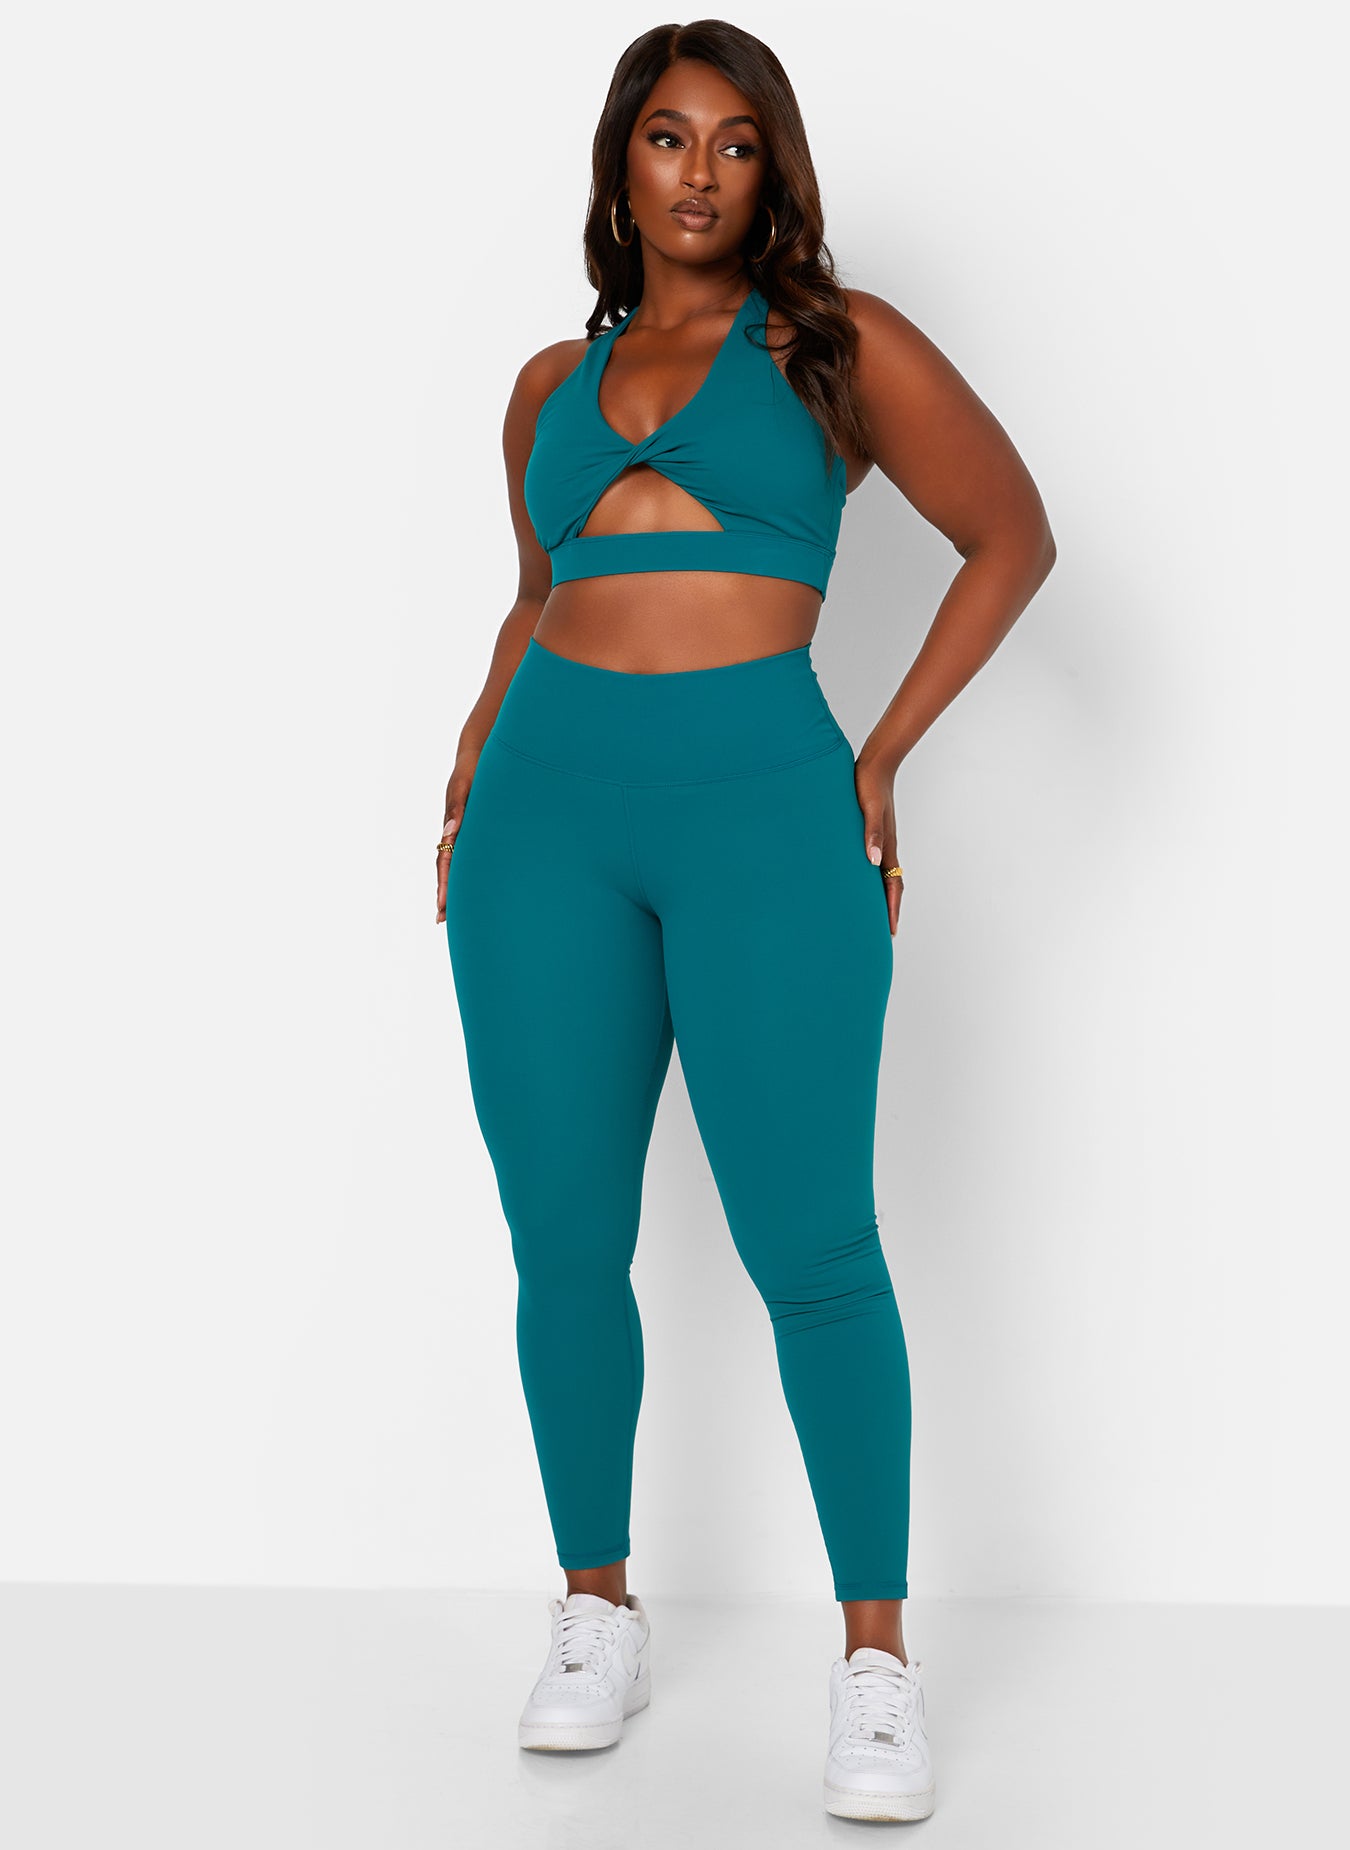 Teal In Motion Cut Out Sports Bra Plus Sizes